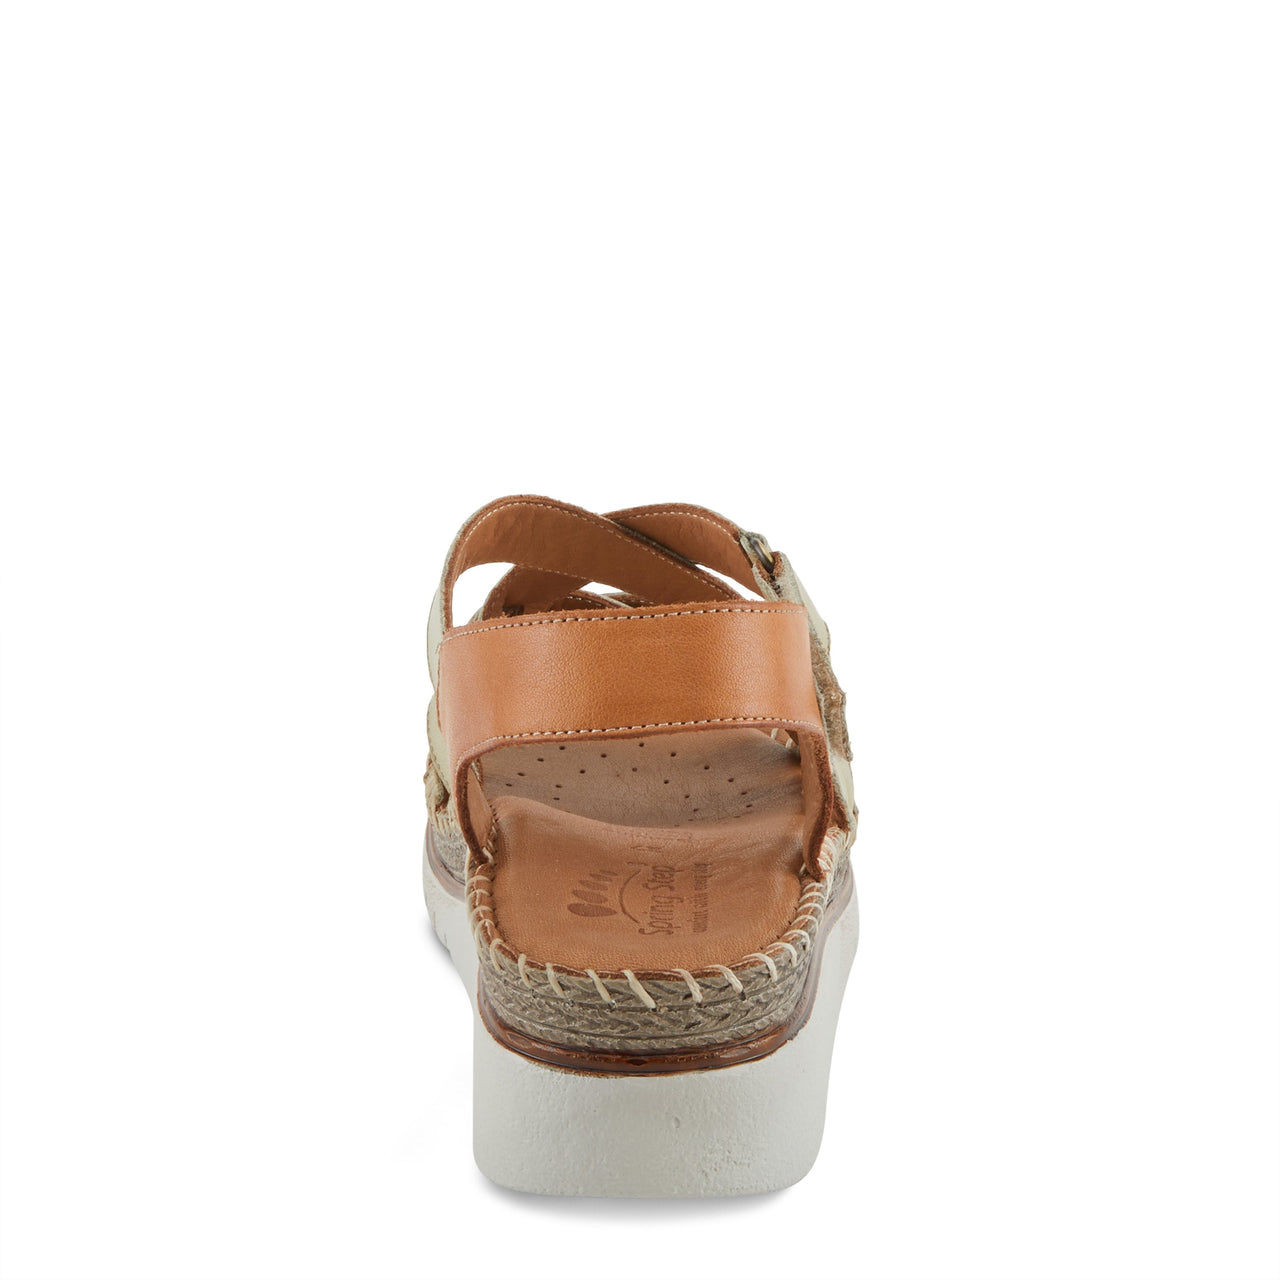 Spring Step Migula Sandals in olive green with soft textile lining and platform wedge